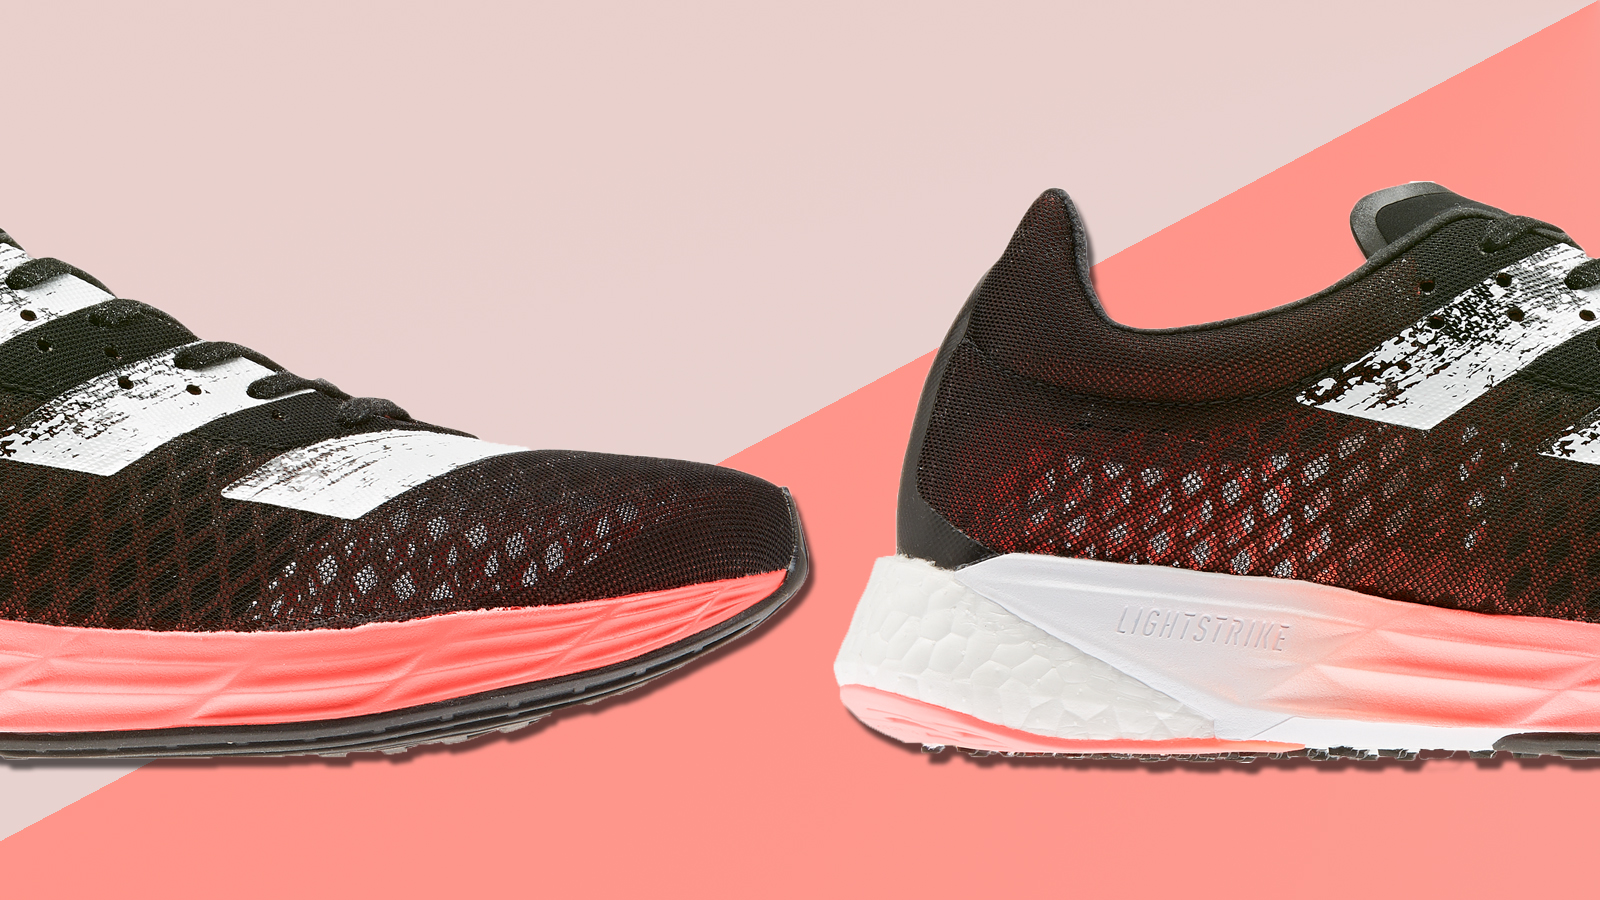 Vaporfly Adidas SAVE 38% - ginfinity.rs